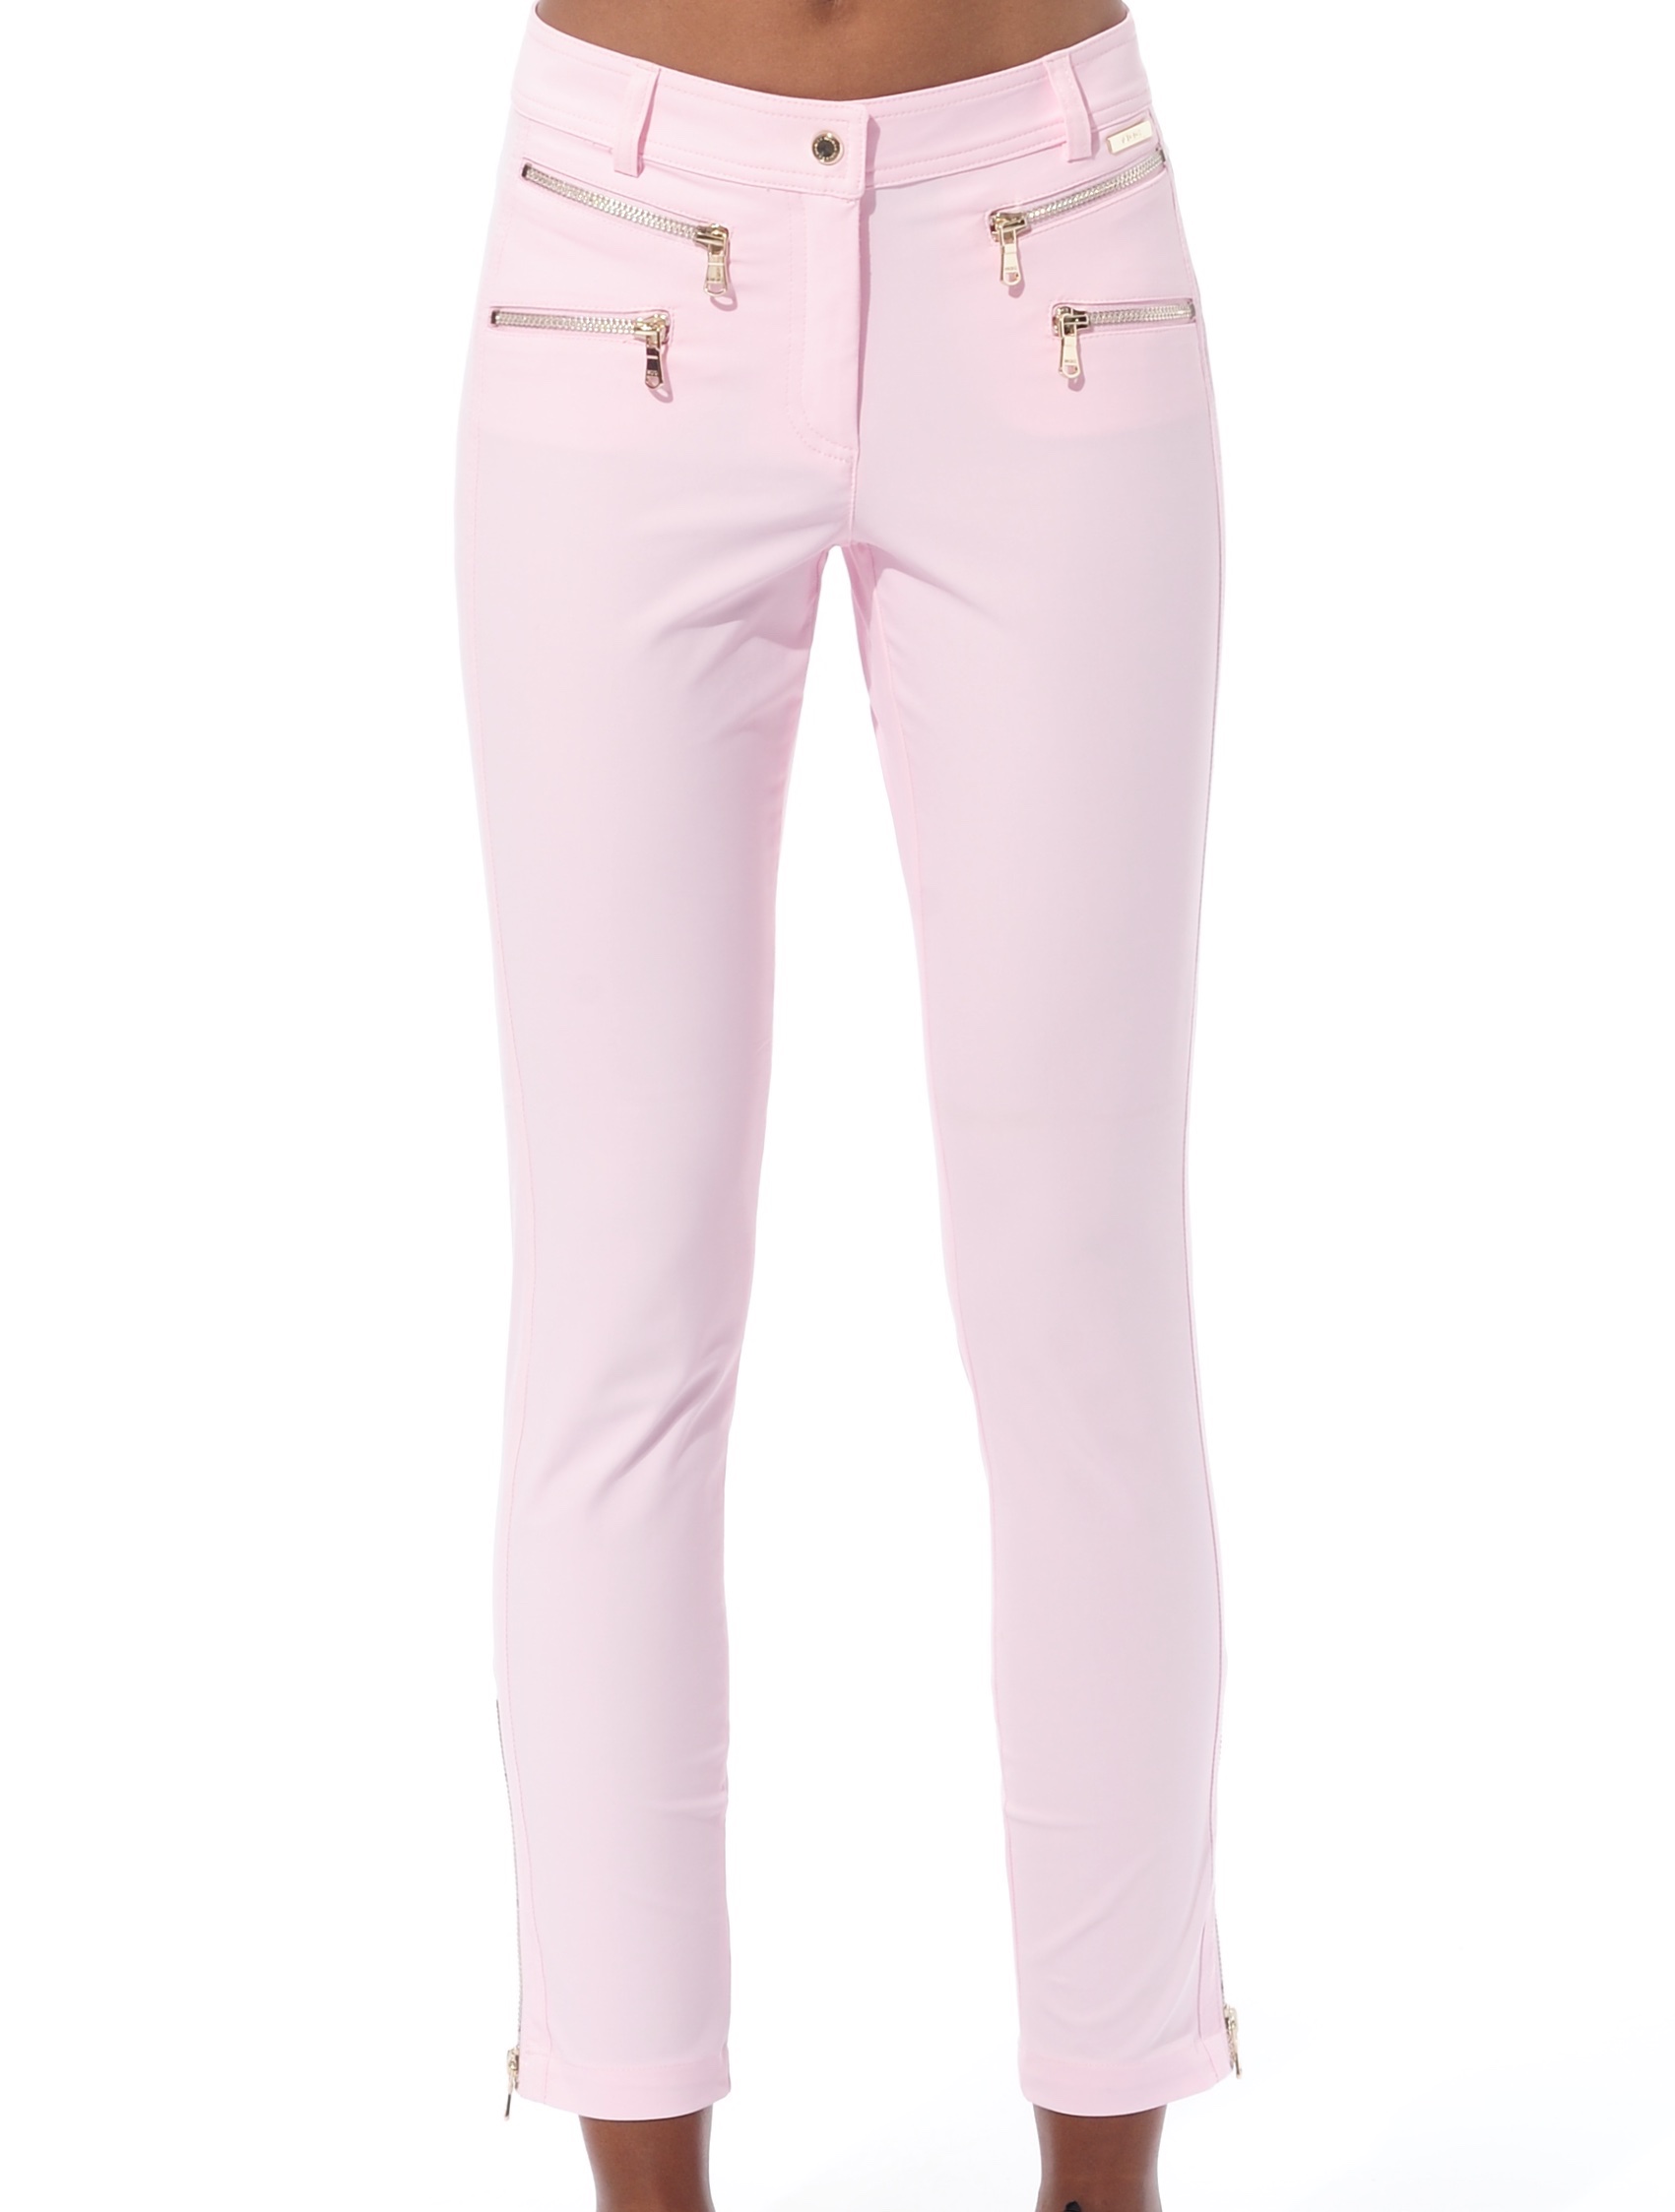 4way stretch double zip ankle pants macaron 